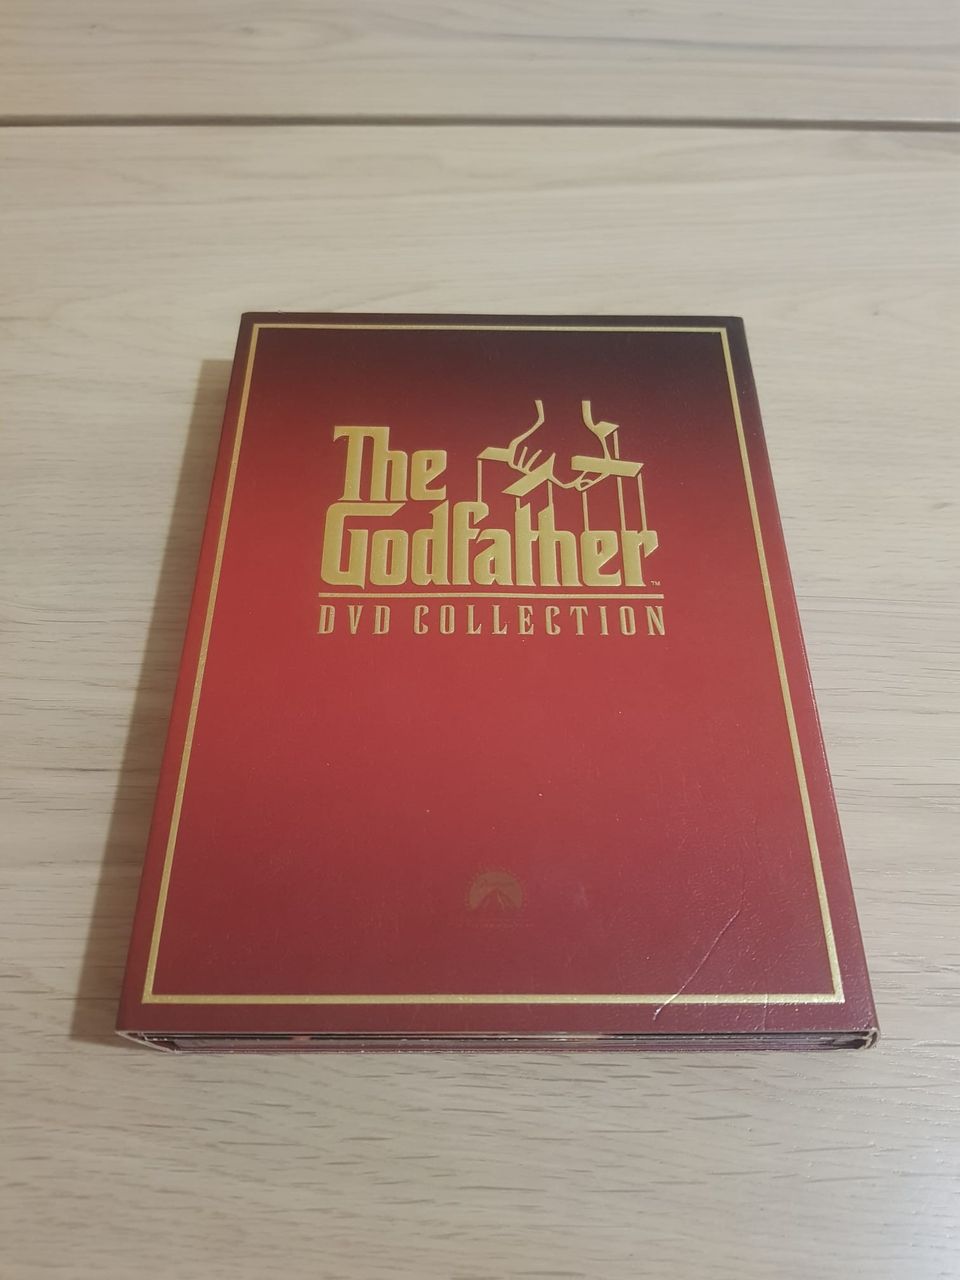 The Godfather - DVD Collection